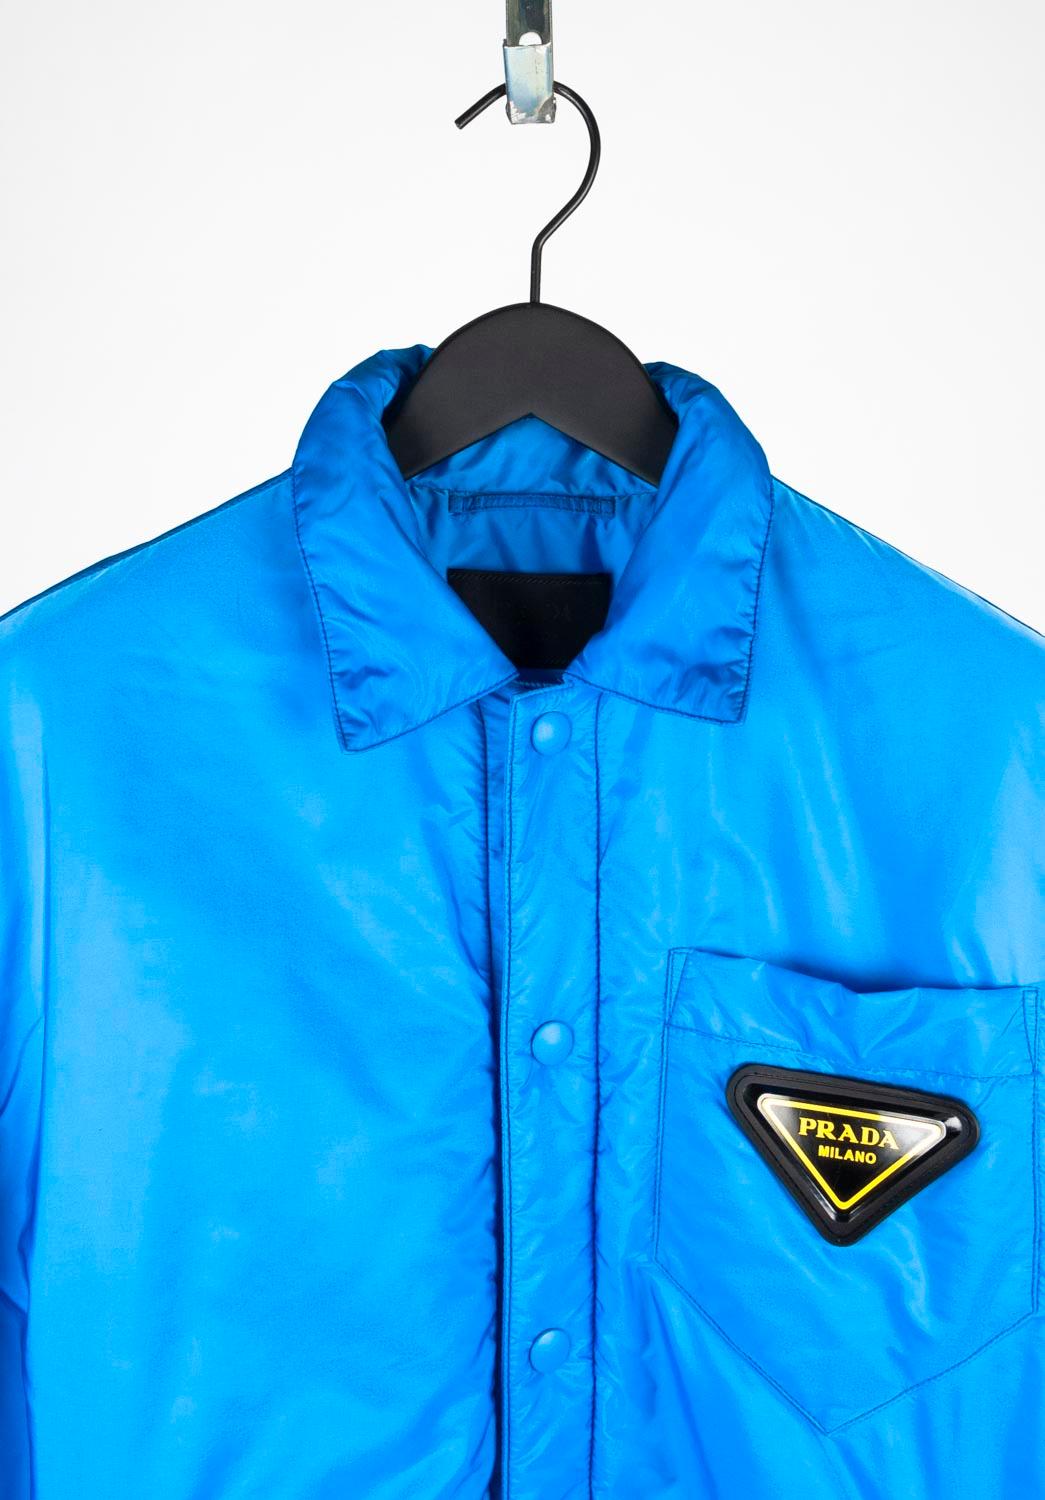 100% genuine Prada Nylon blue jacket, S641 
Color: blue
(An actual color may a bit vary due to individual computer screen interpretation)
Material: 100% nylon
Tag size: M runs relaxed fit, oversized Medium
This jacket is great quality item. Rate 9